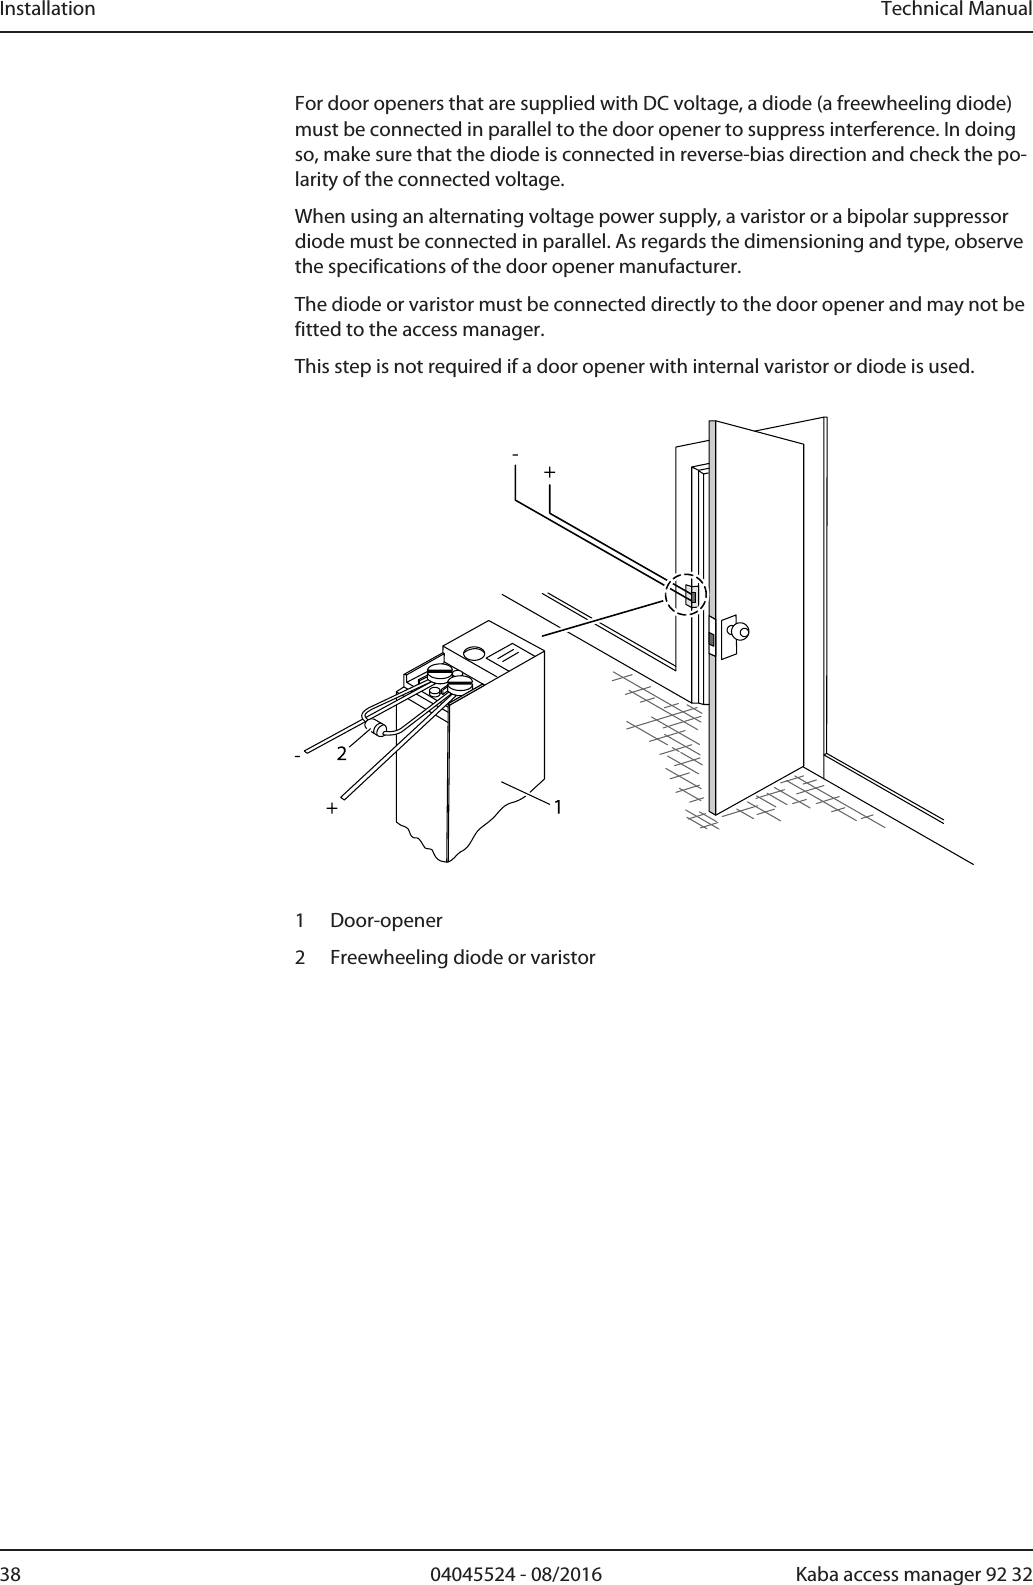 Installation Technical Manual38 04045524 - 08/2016 Kaba access manager 92 32For door openers that are supplied with DC voltage, a diode (a freewheeling diode)must be connected in parallel to the door opener to suppress interference. In doingso, make sure that the diode is connected in reverse-bias direction and check the po-larity of the connected voltage.When using an alternating voltage power supply, a varistor or a bipolar suppressordiode must be connected in parallel. As regards the dimensioning and type, observethe specifications of the door opener manufacturer.The diode or varistor must be connected directly to the door opener and may not befitted to the access manager.This step is not required if a door opener with internal varistor or diode is used.1 Door-opener2 Freewheeling diode or varistor